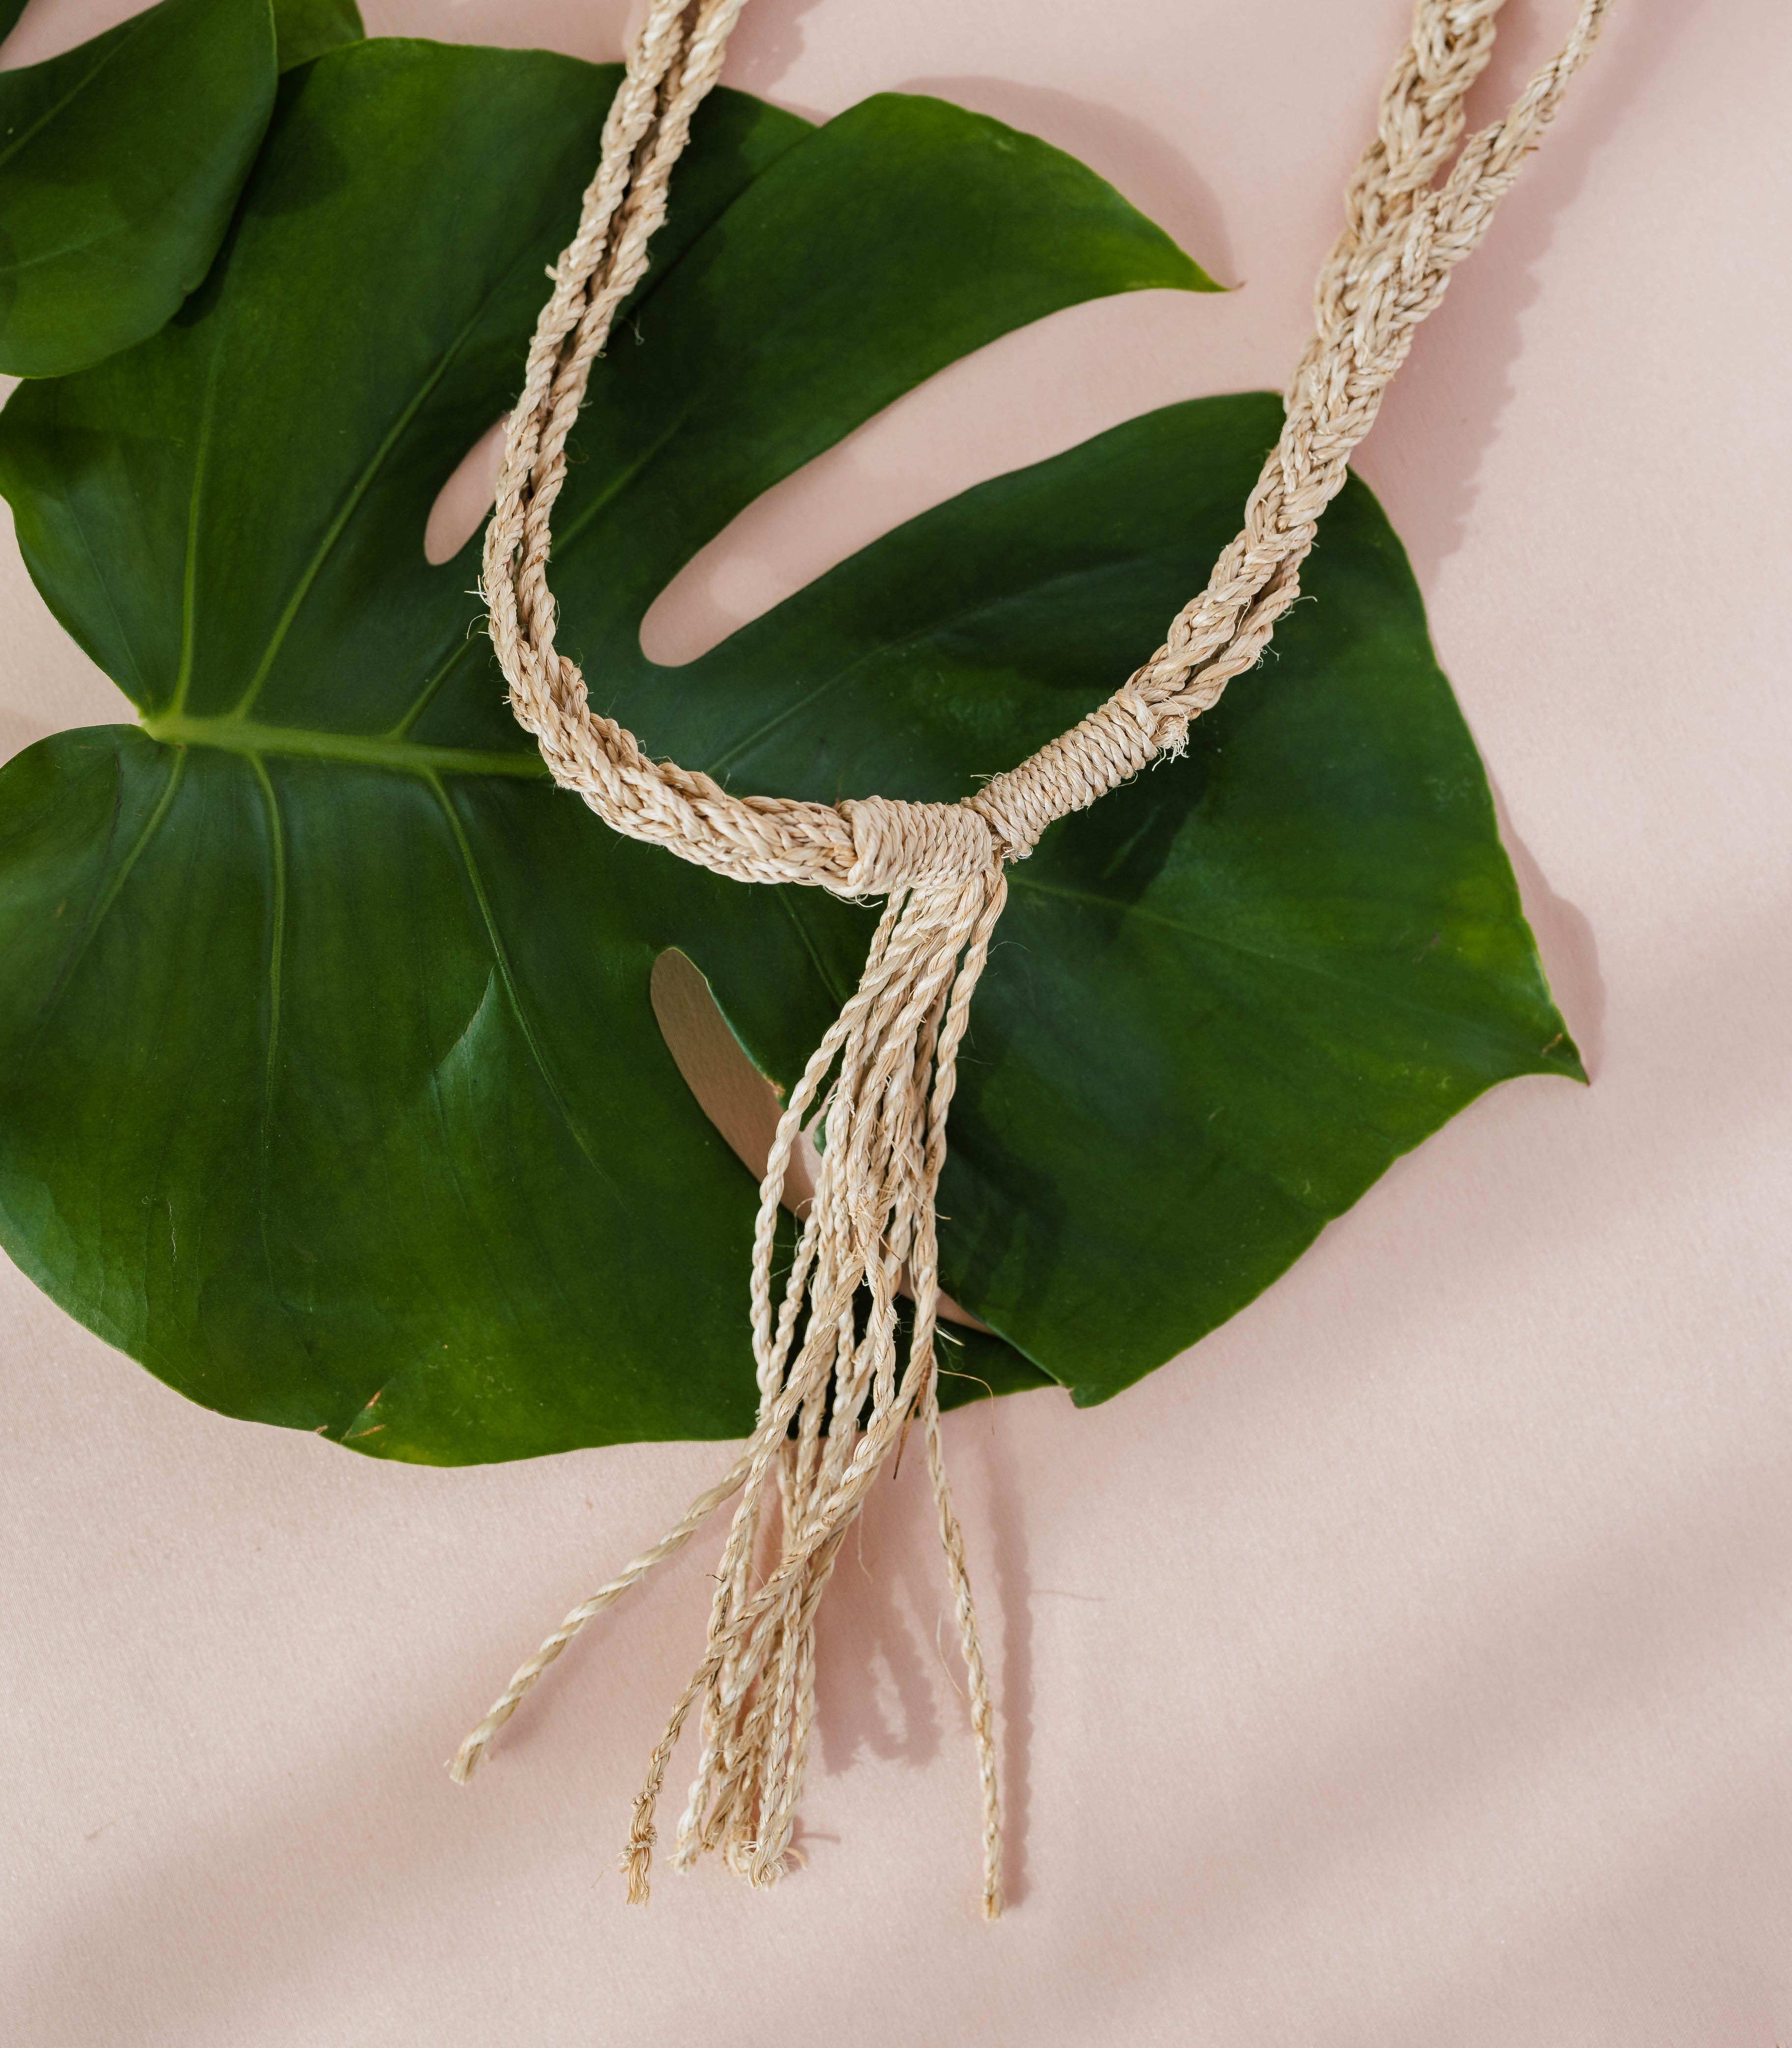 Woven Abaca Unity Cord - The Wedding Library